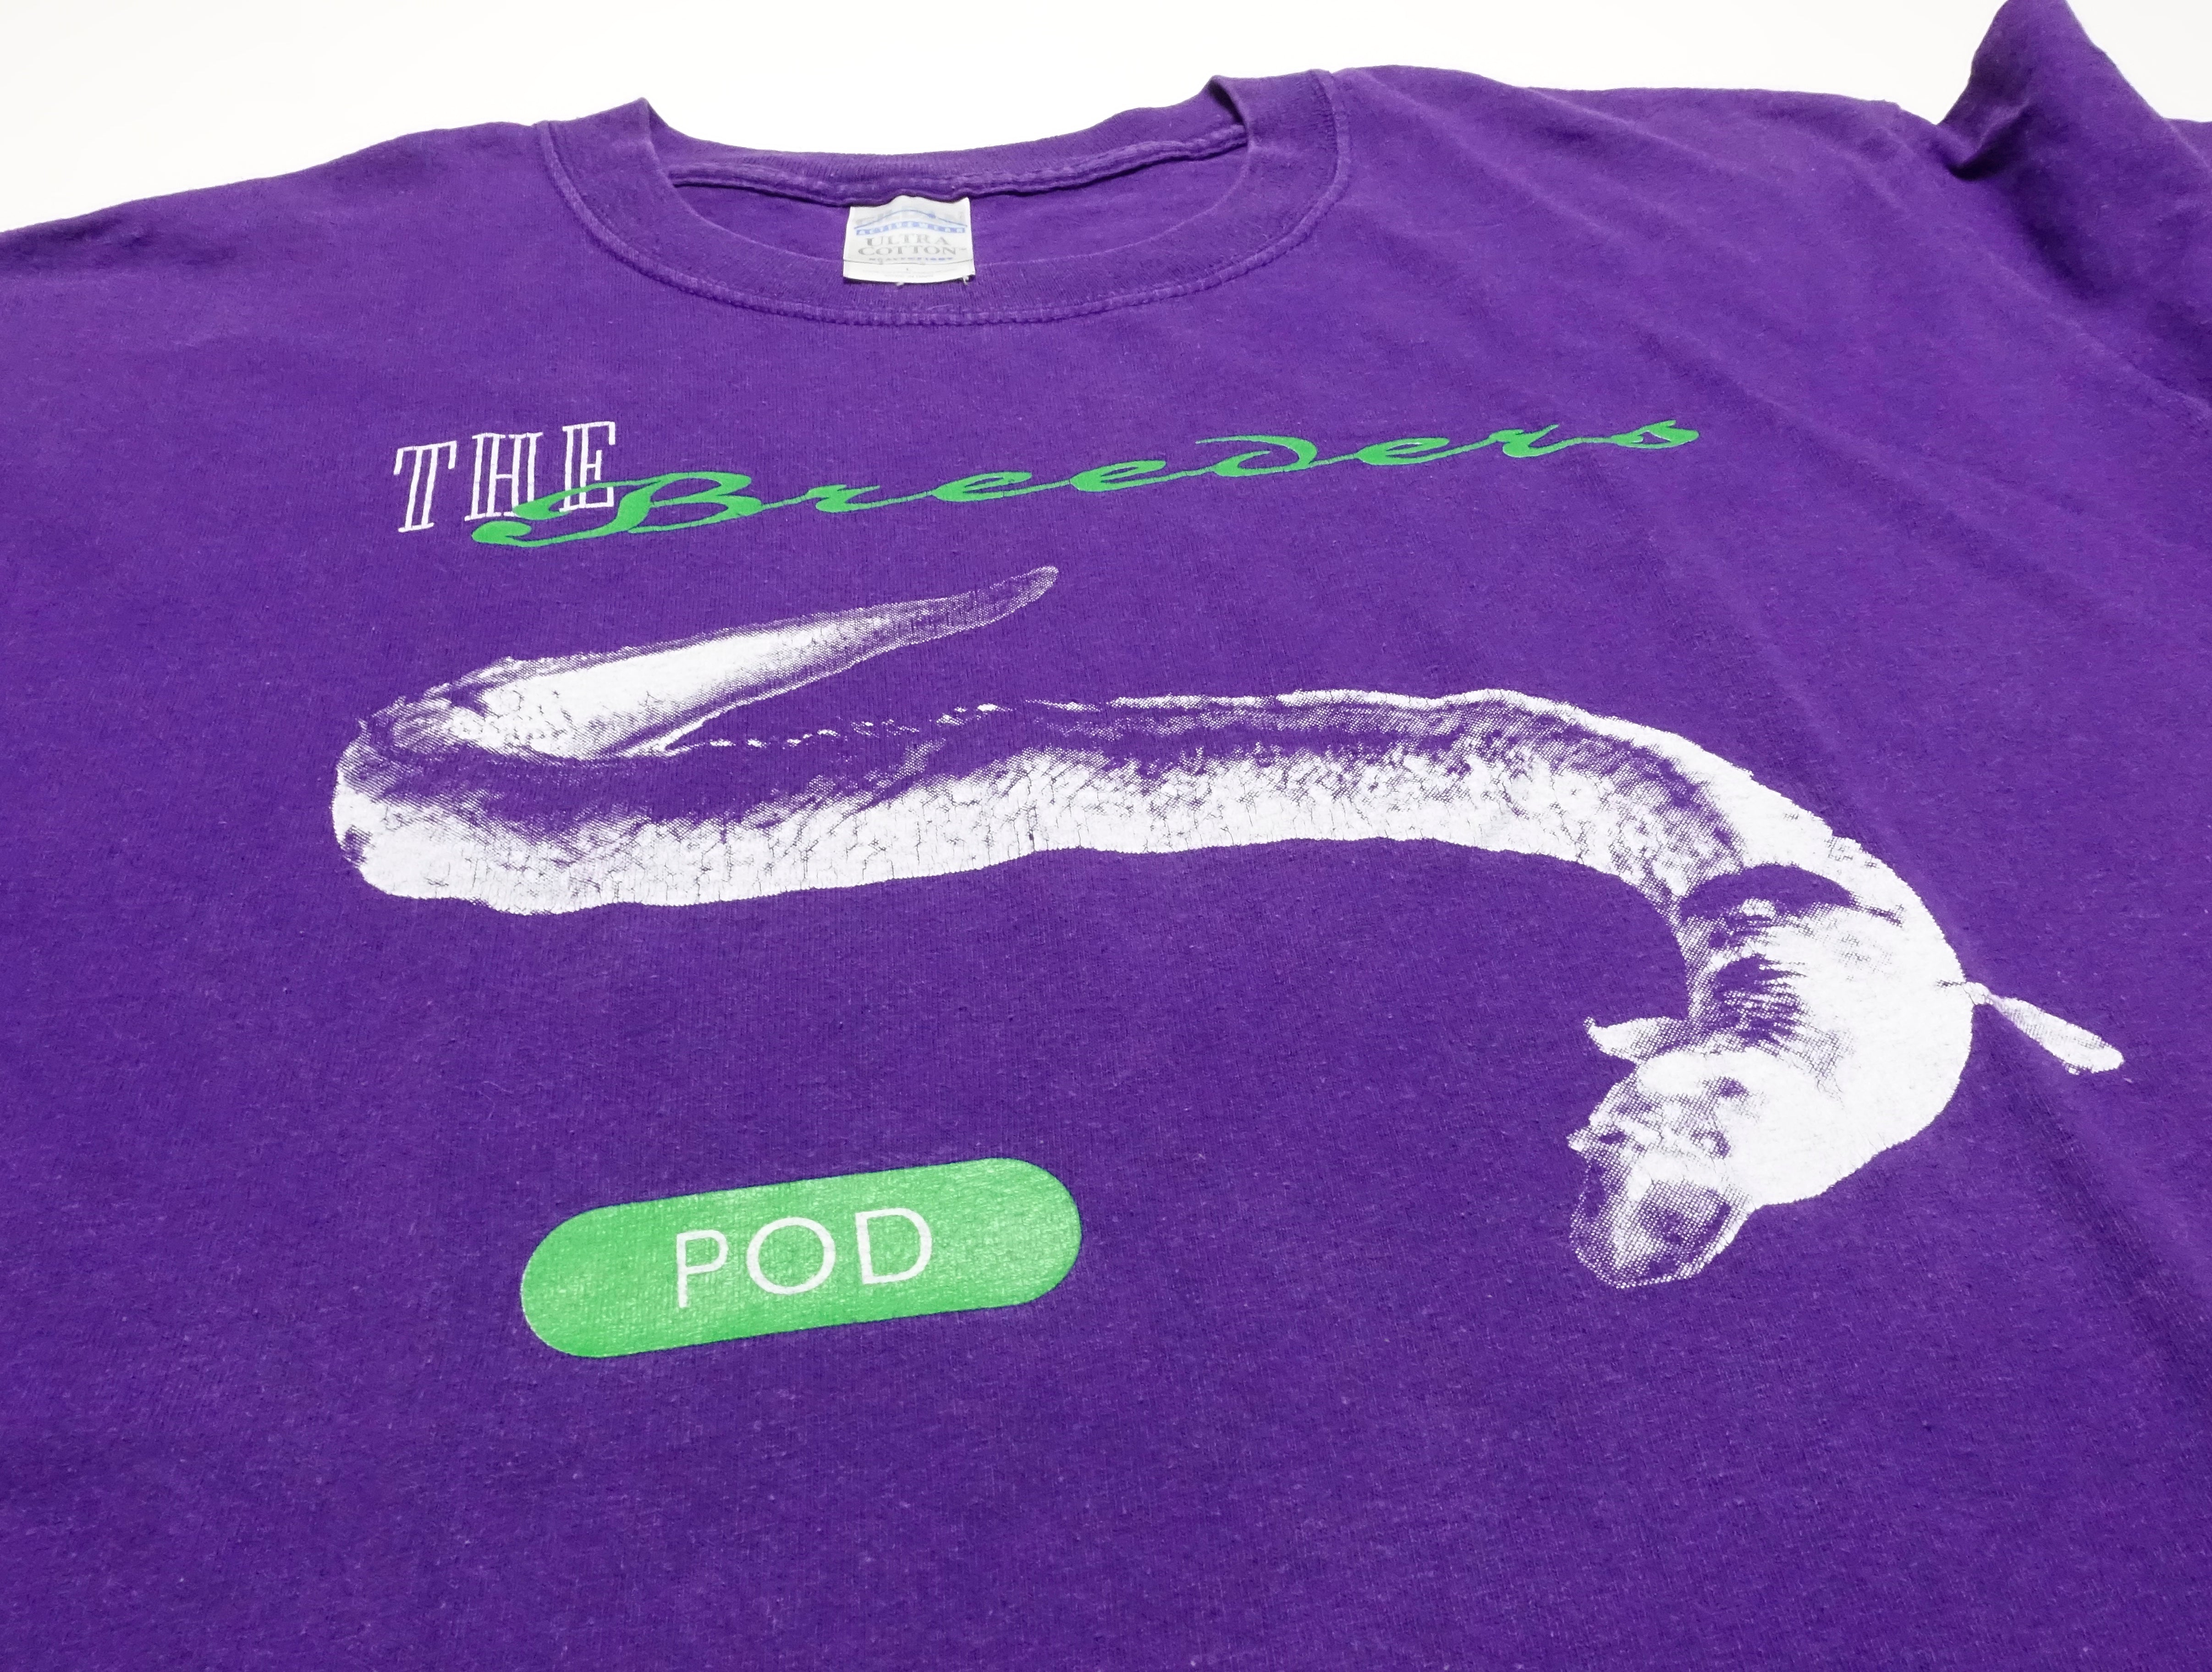 the Breeders - Eel / Pod 90's Tour Shirt Size Large